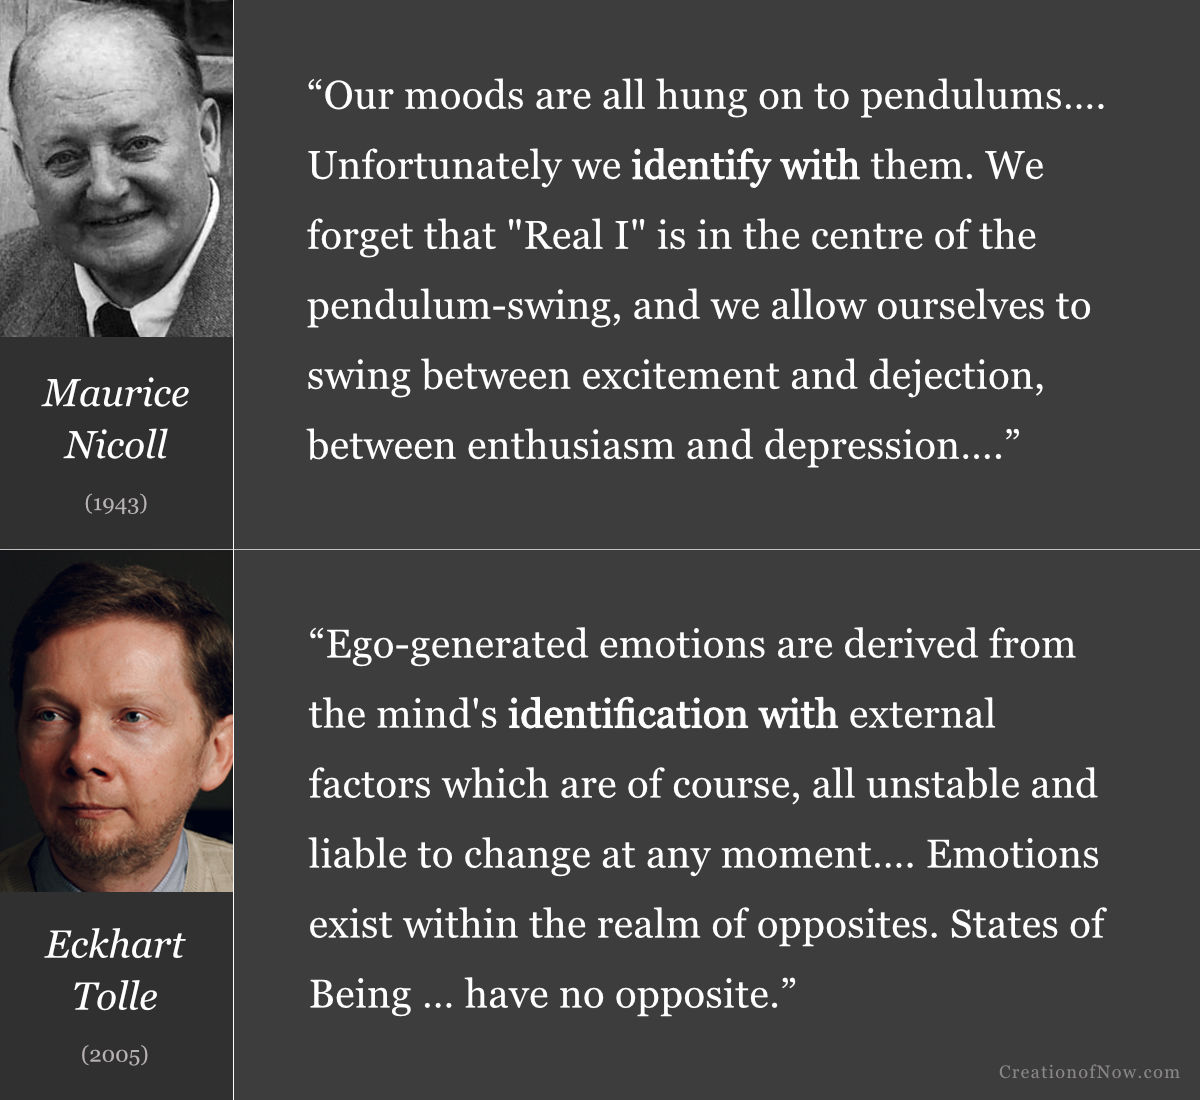 Maurice Nicoll and Eckhart Tolle quotes about how being is outside of the opposites